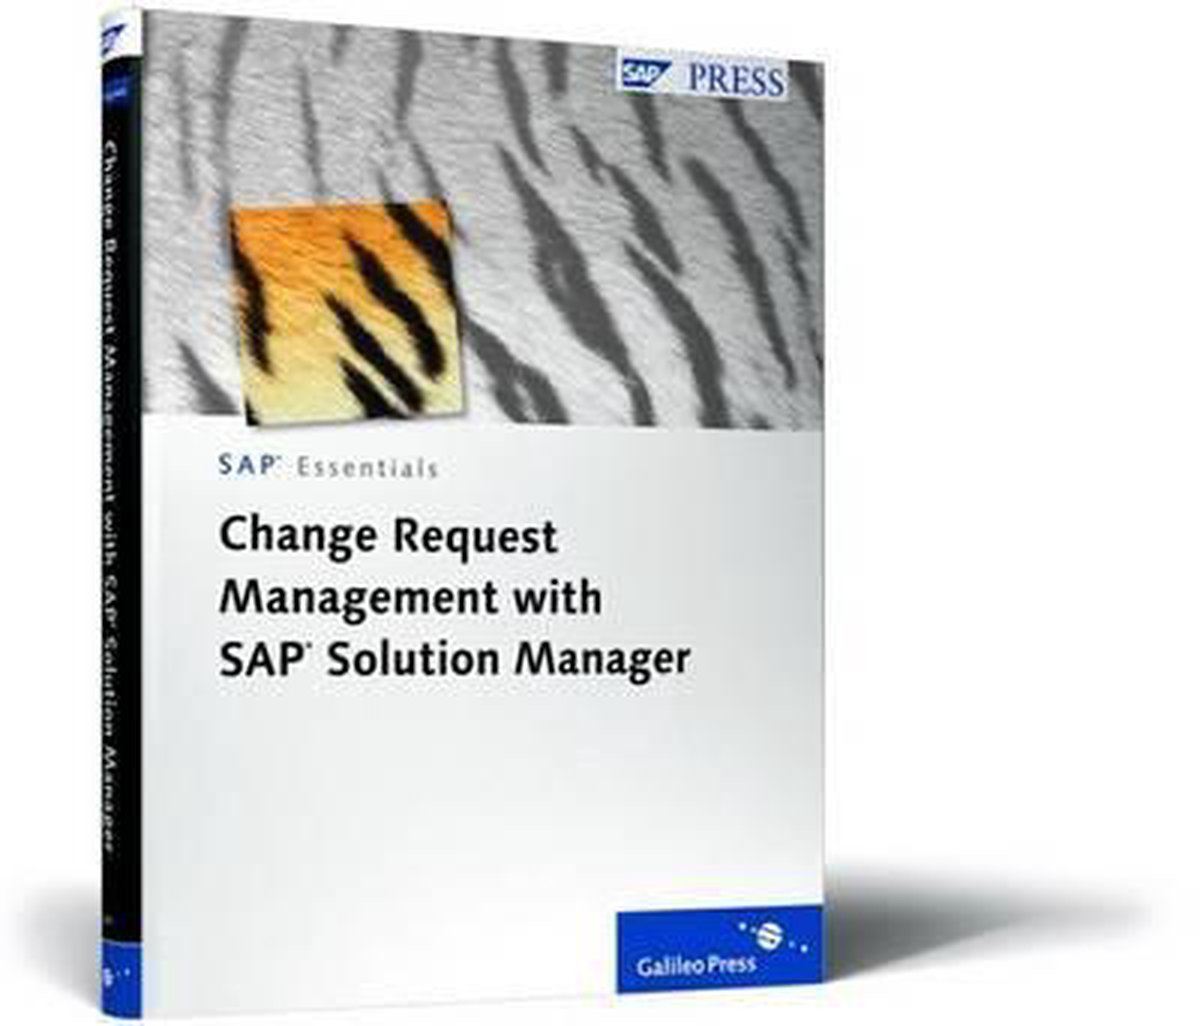 Change Request Management with SAP Solution Manager